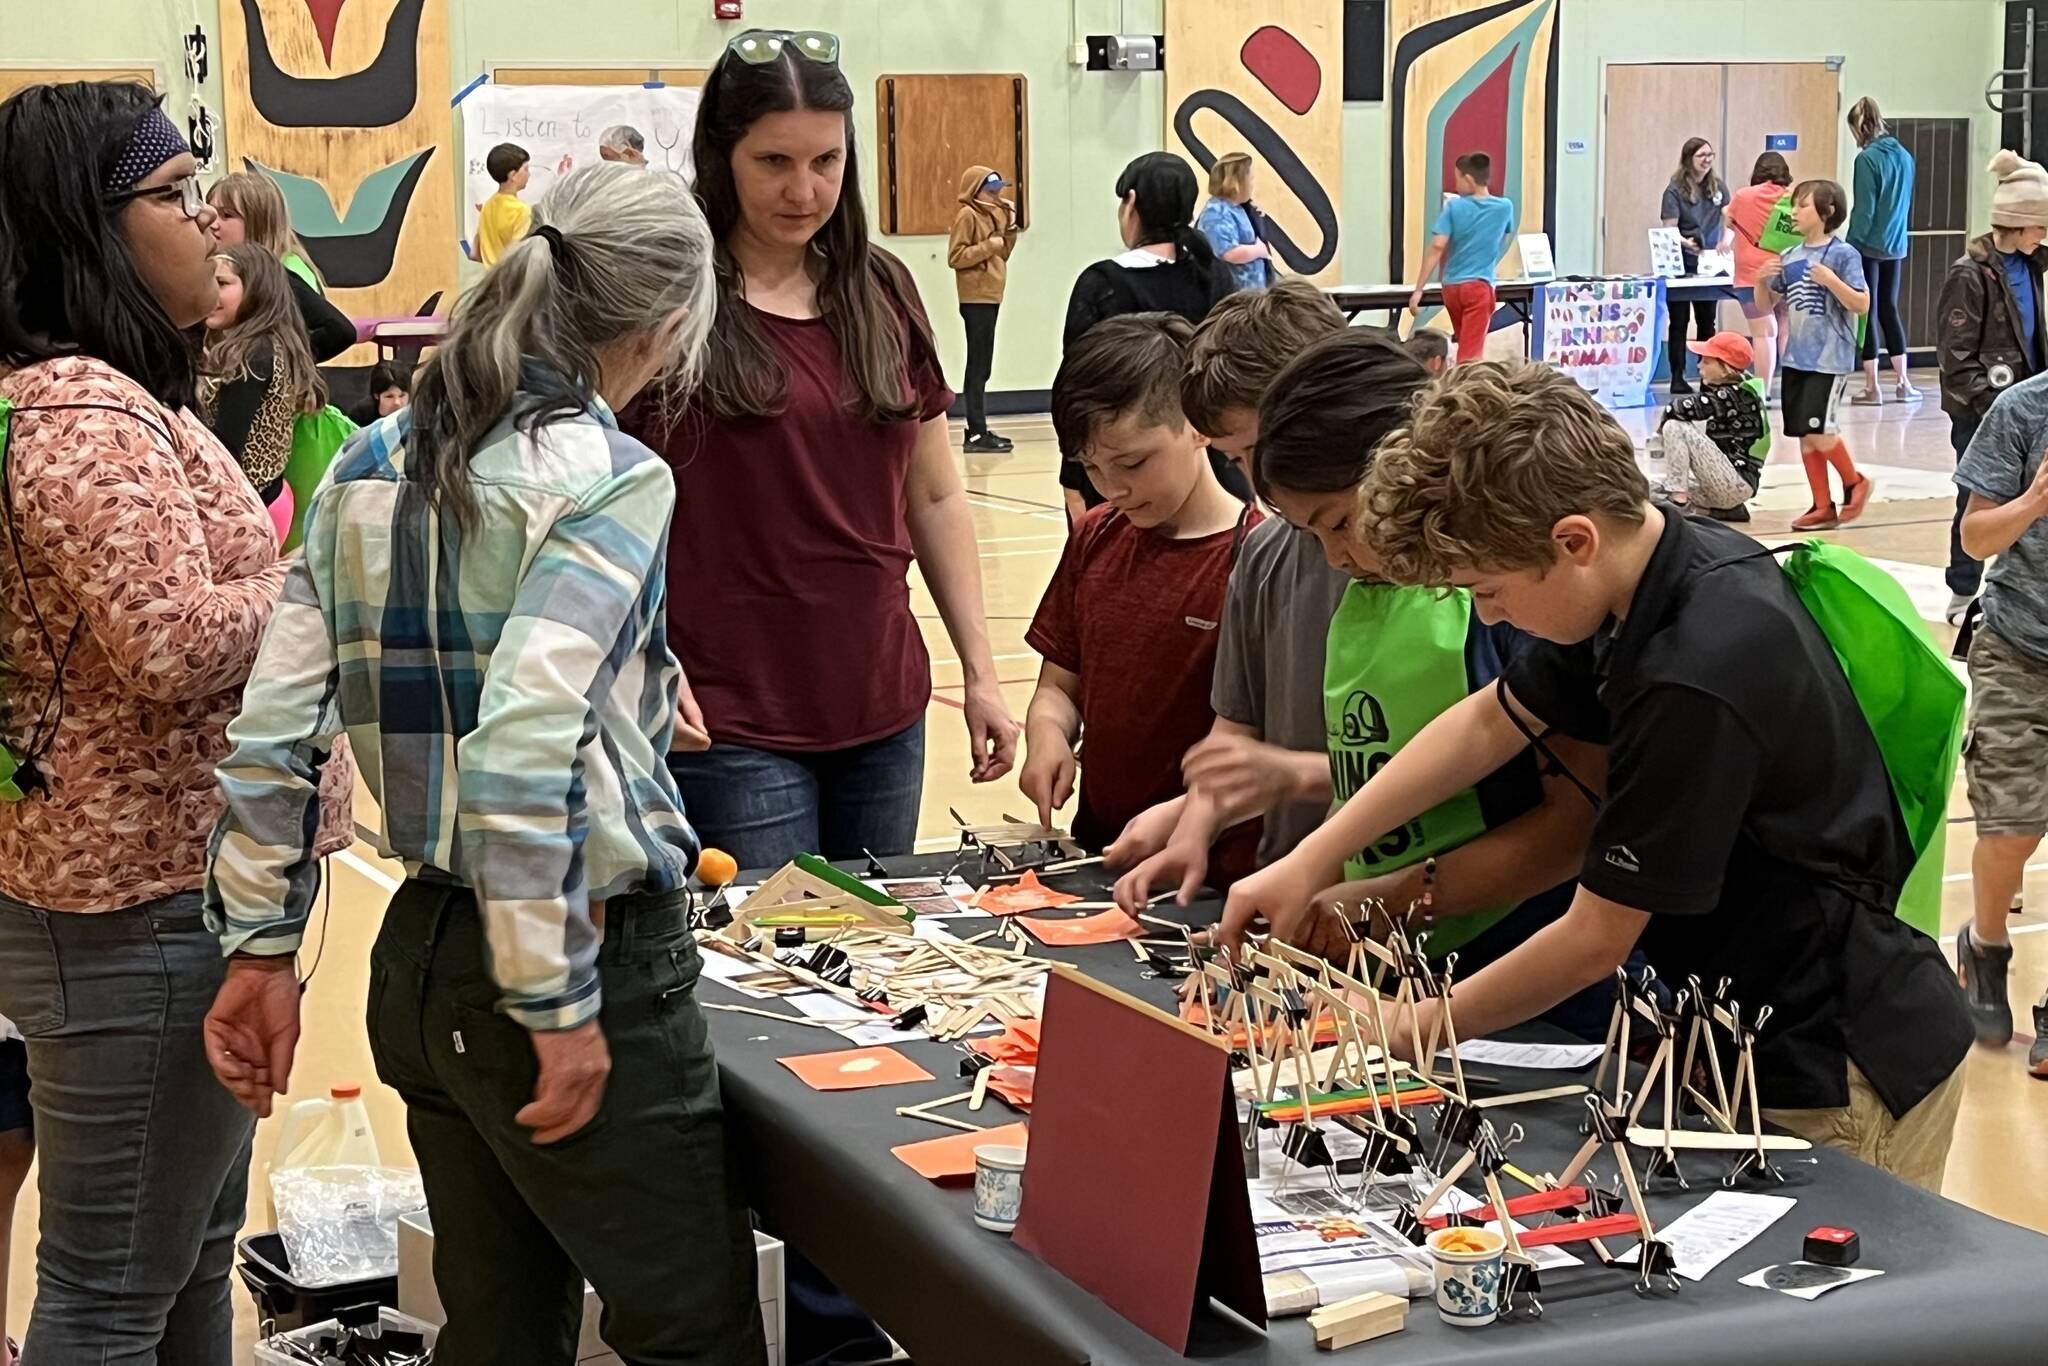 Robin Gilerist hosts the Bridge Building with University of Alaska Southeast, giving students a chance to build bridges of their own at Gilerist’s station on Thursday.